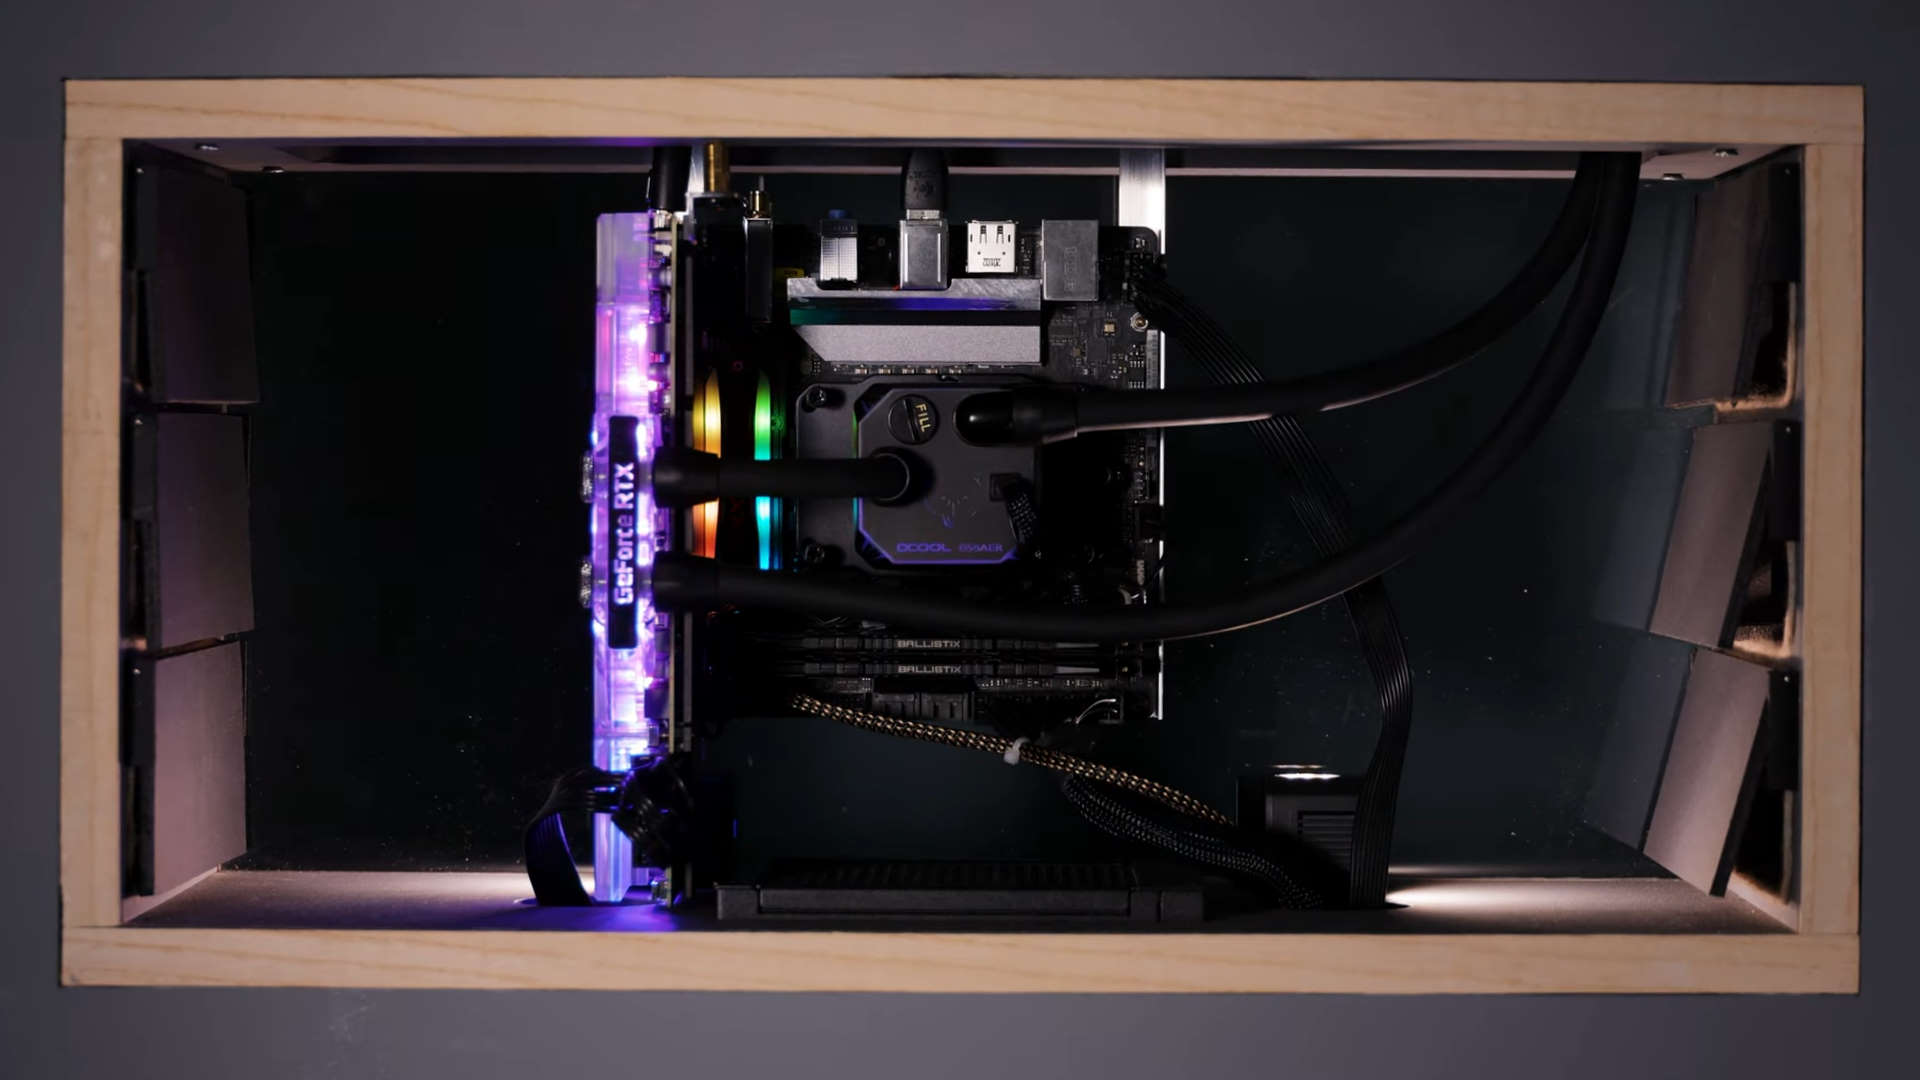 The DIY Perks breathing PC, with bellows cooling system